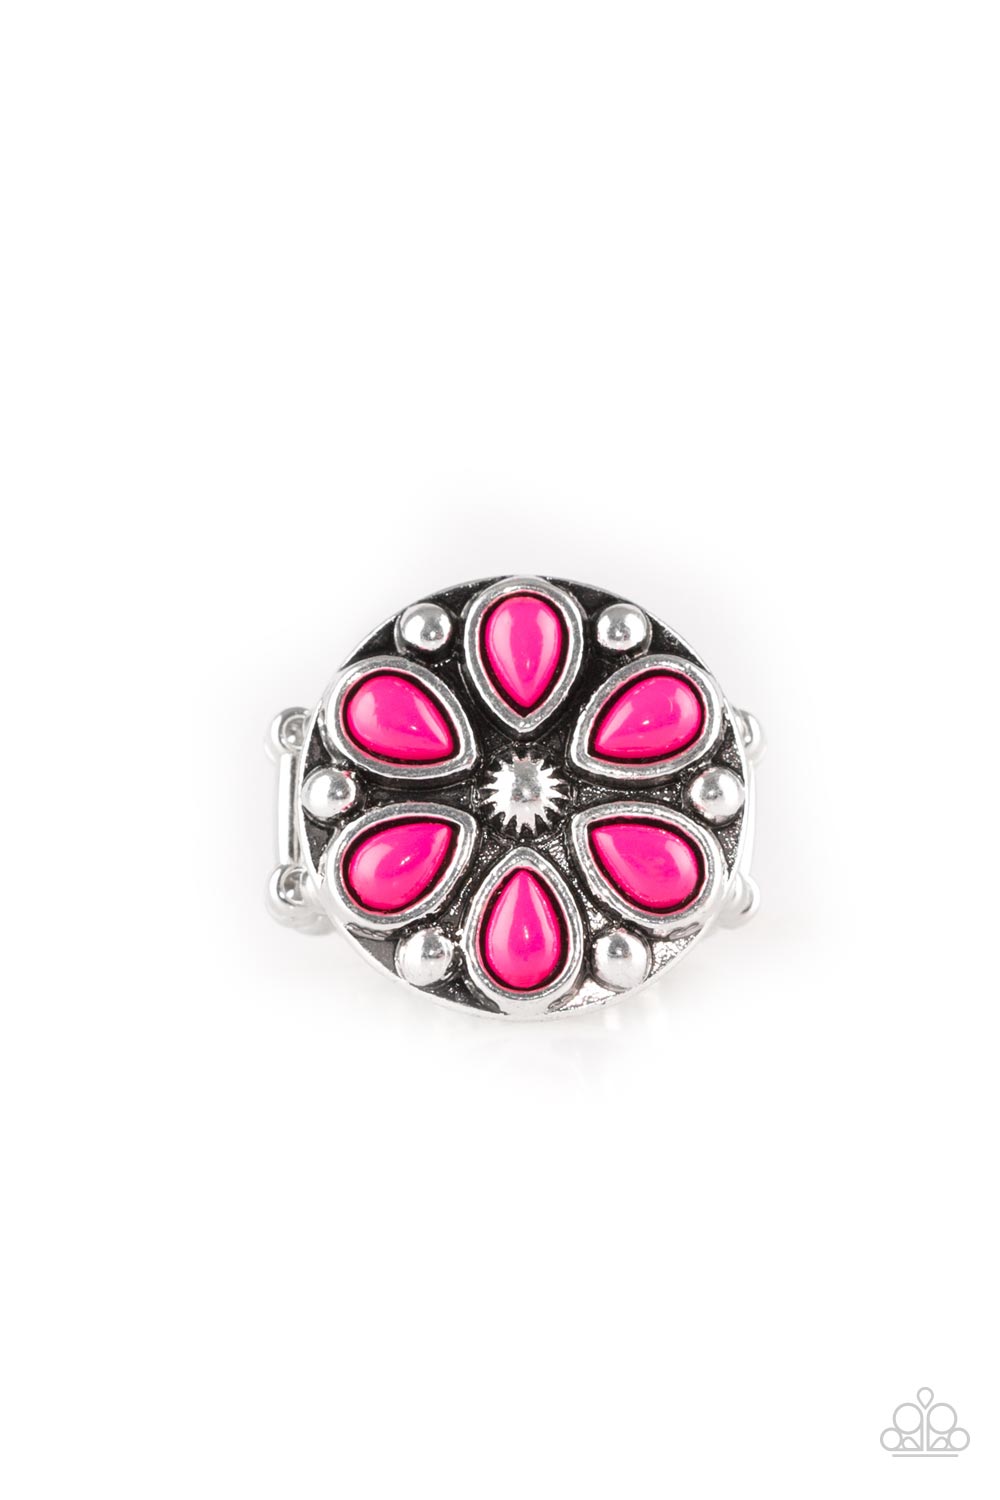 Paparazzi Rings - Color Me Calla Lily - Pink